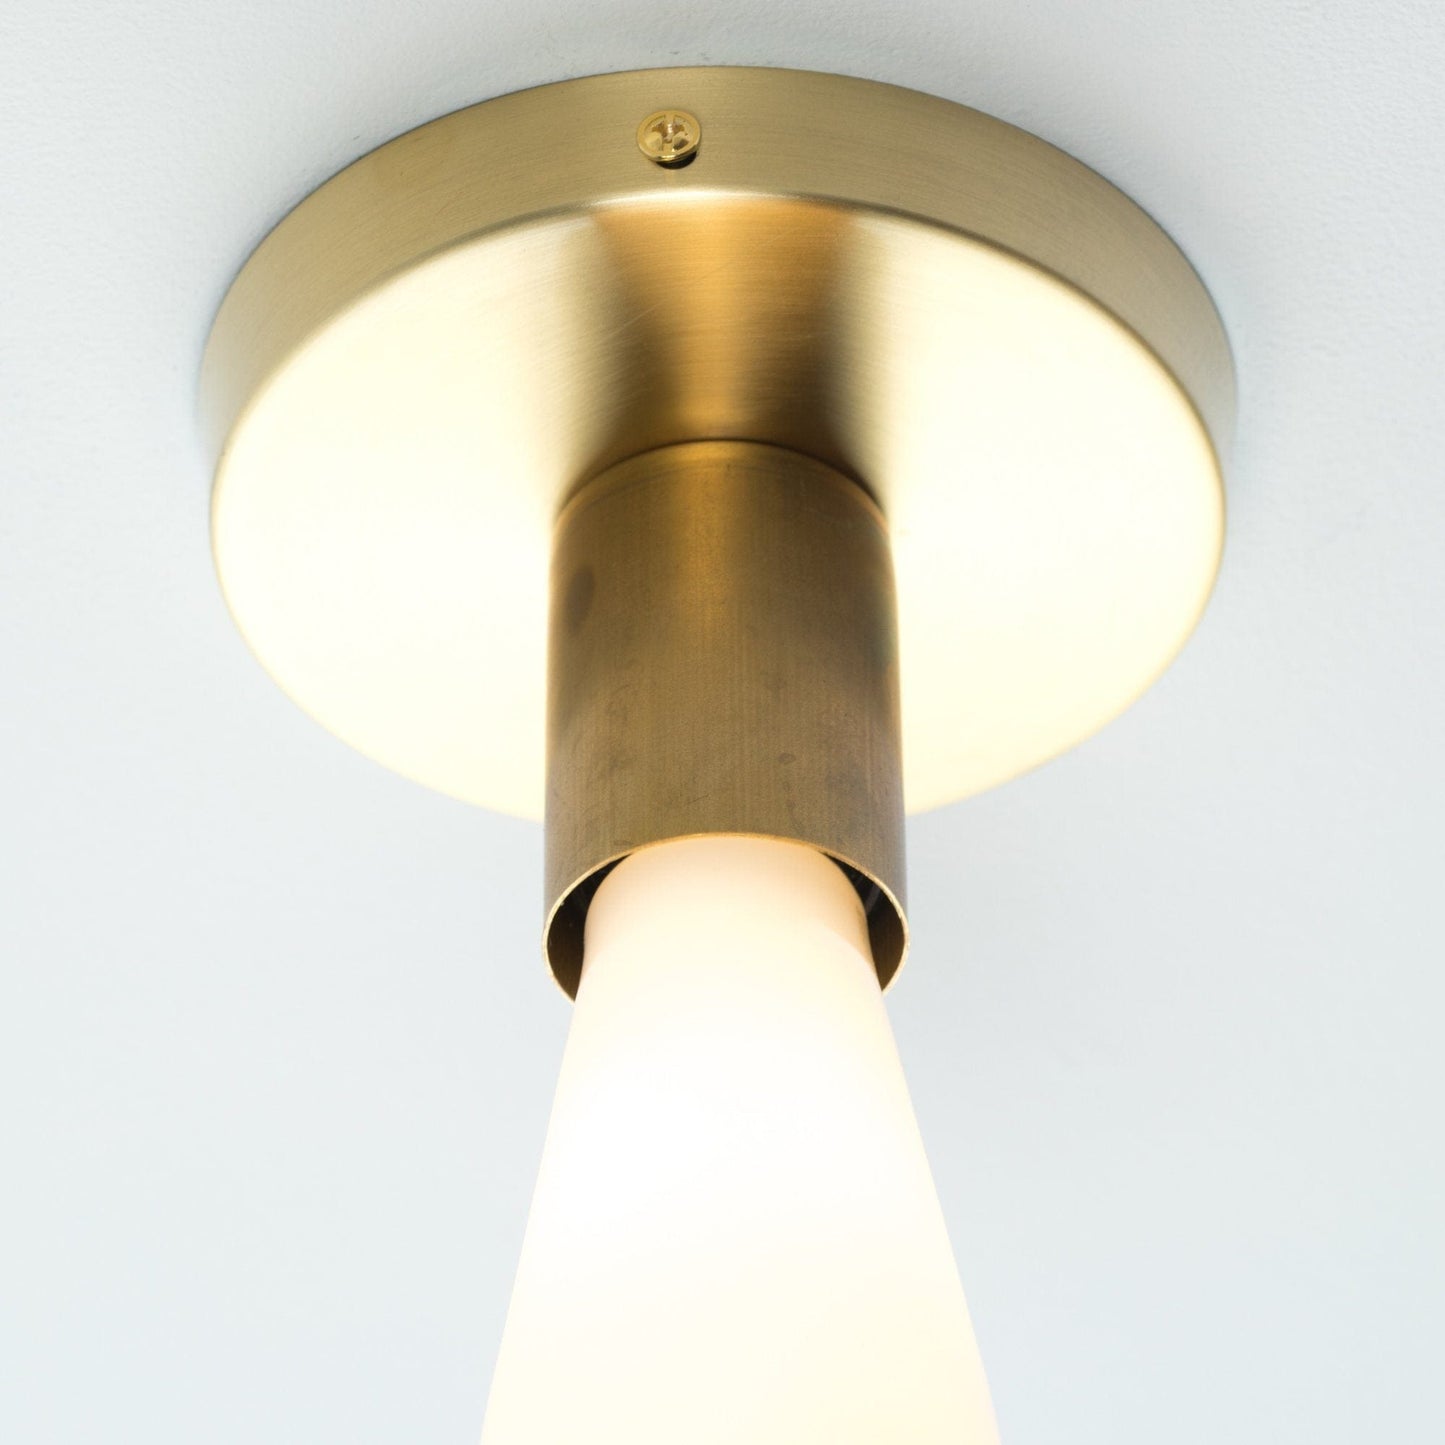 Close Up photo of Button Light in Raw Brass finish. Pictured with an Edison milk glass light bulb